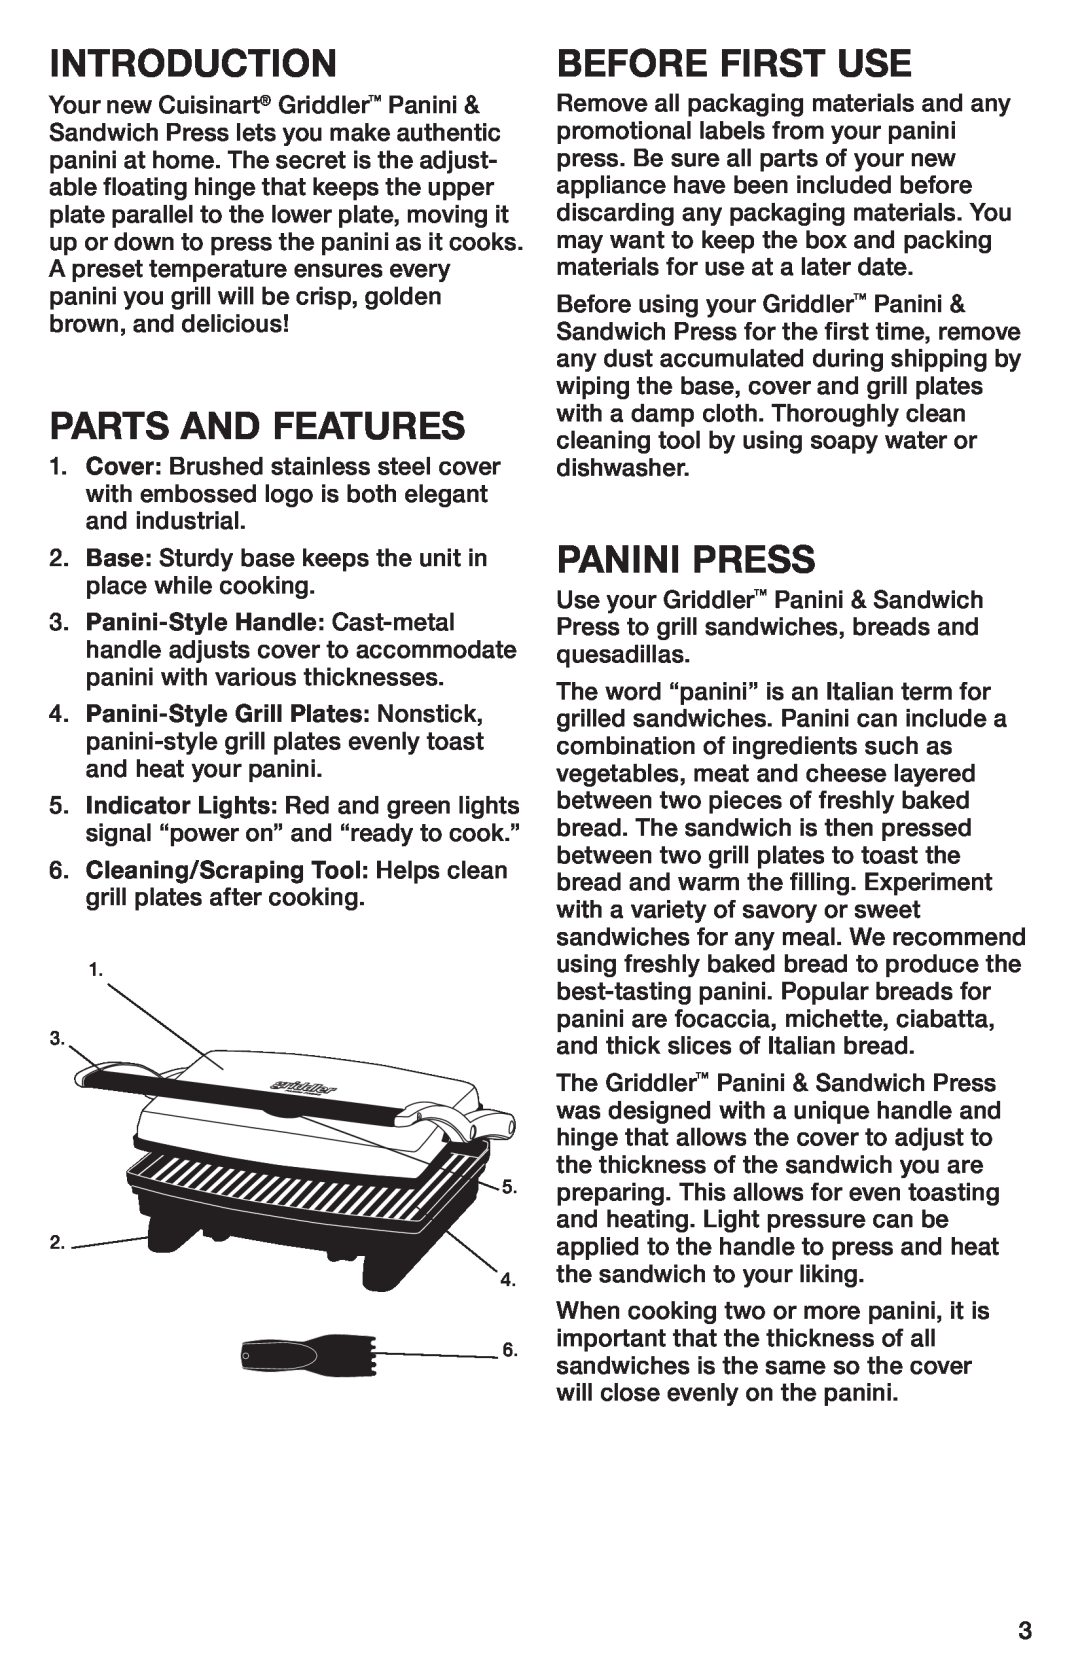 Cuisinart GR-1 manual Introduction, Parts And Features, Before First Use, Panini Press 